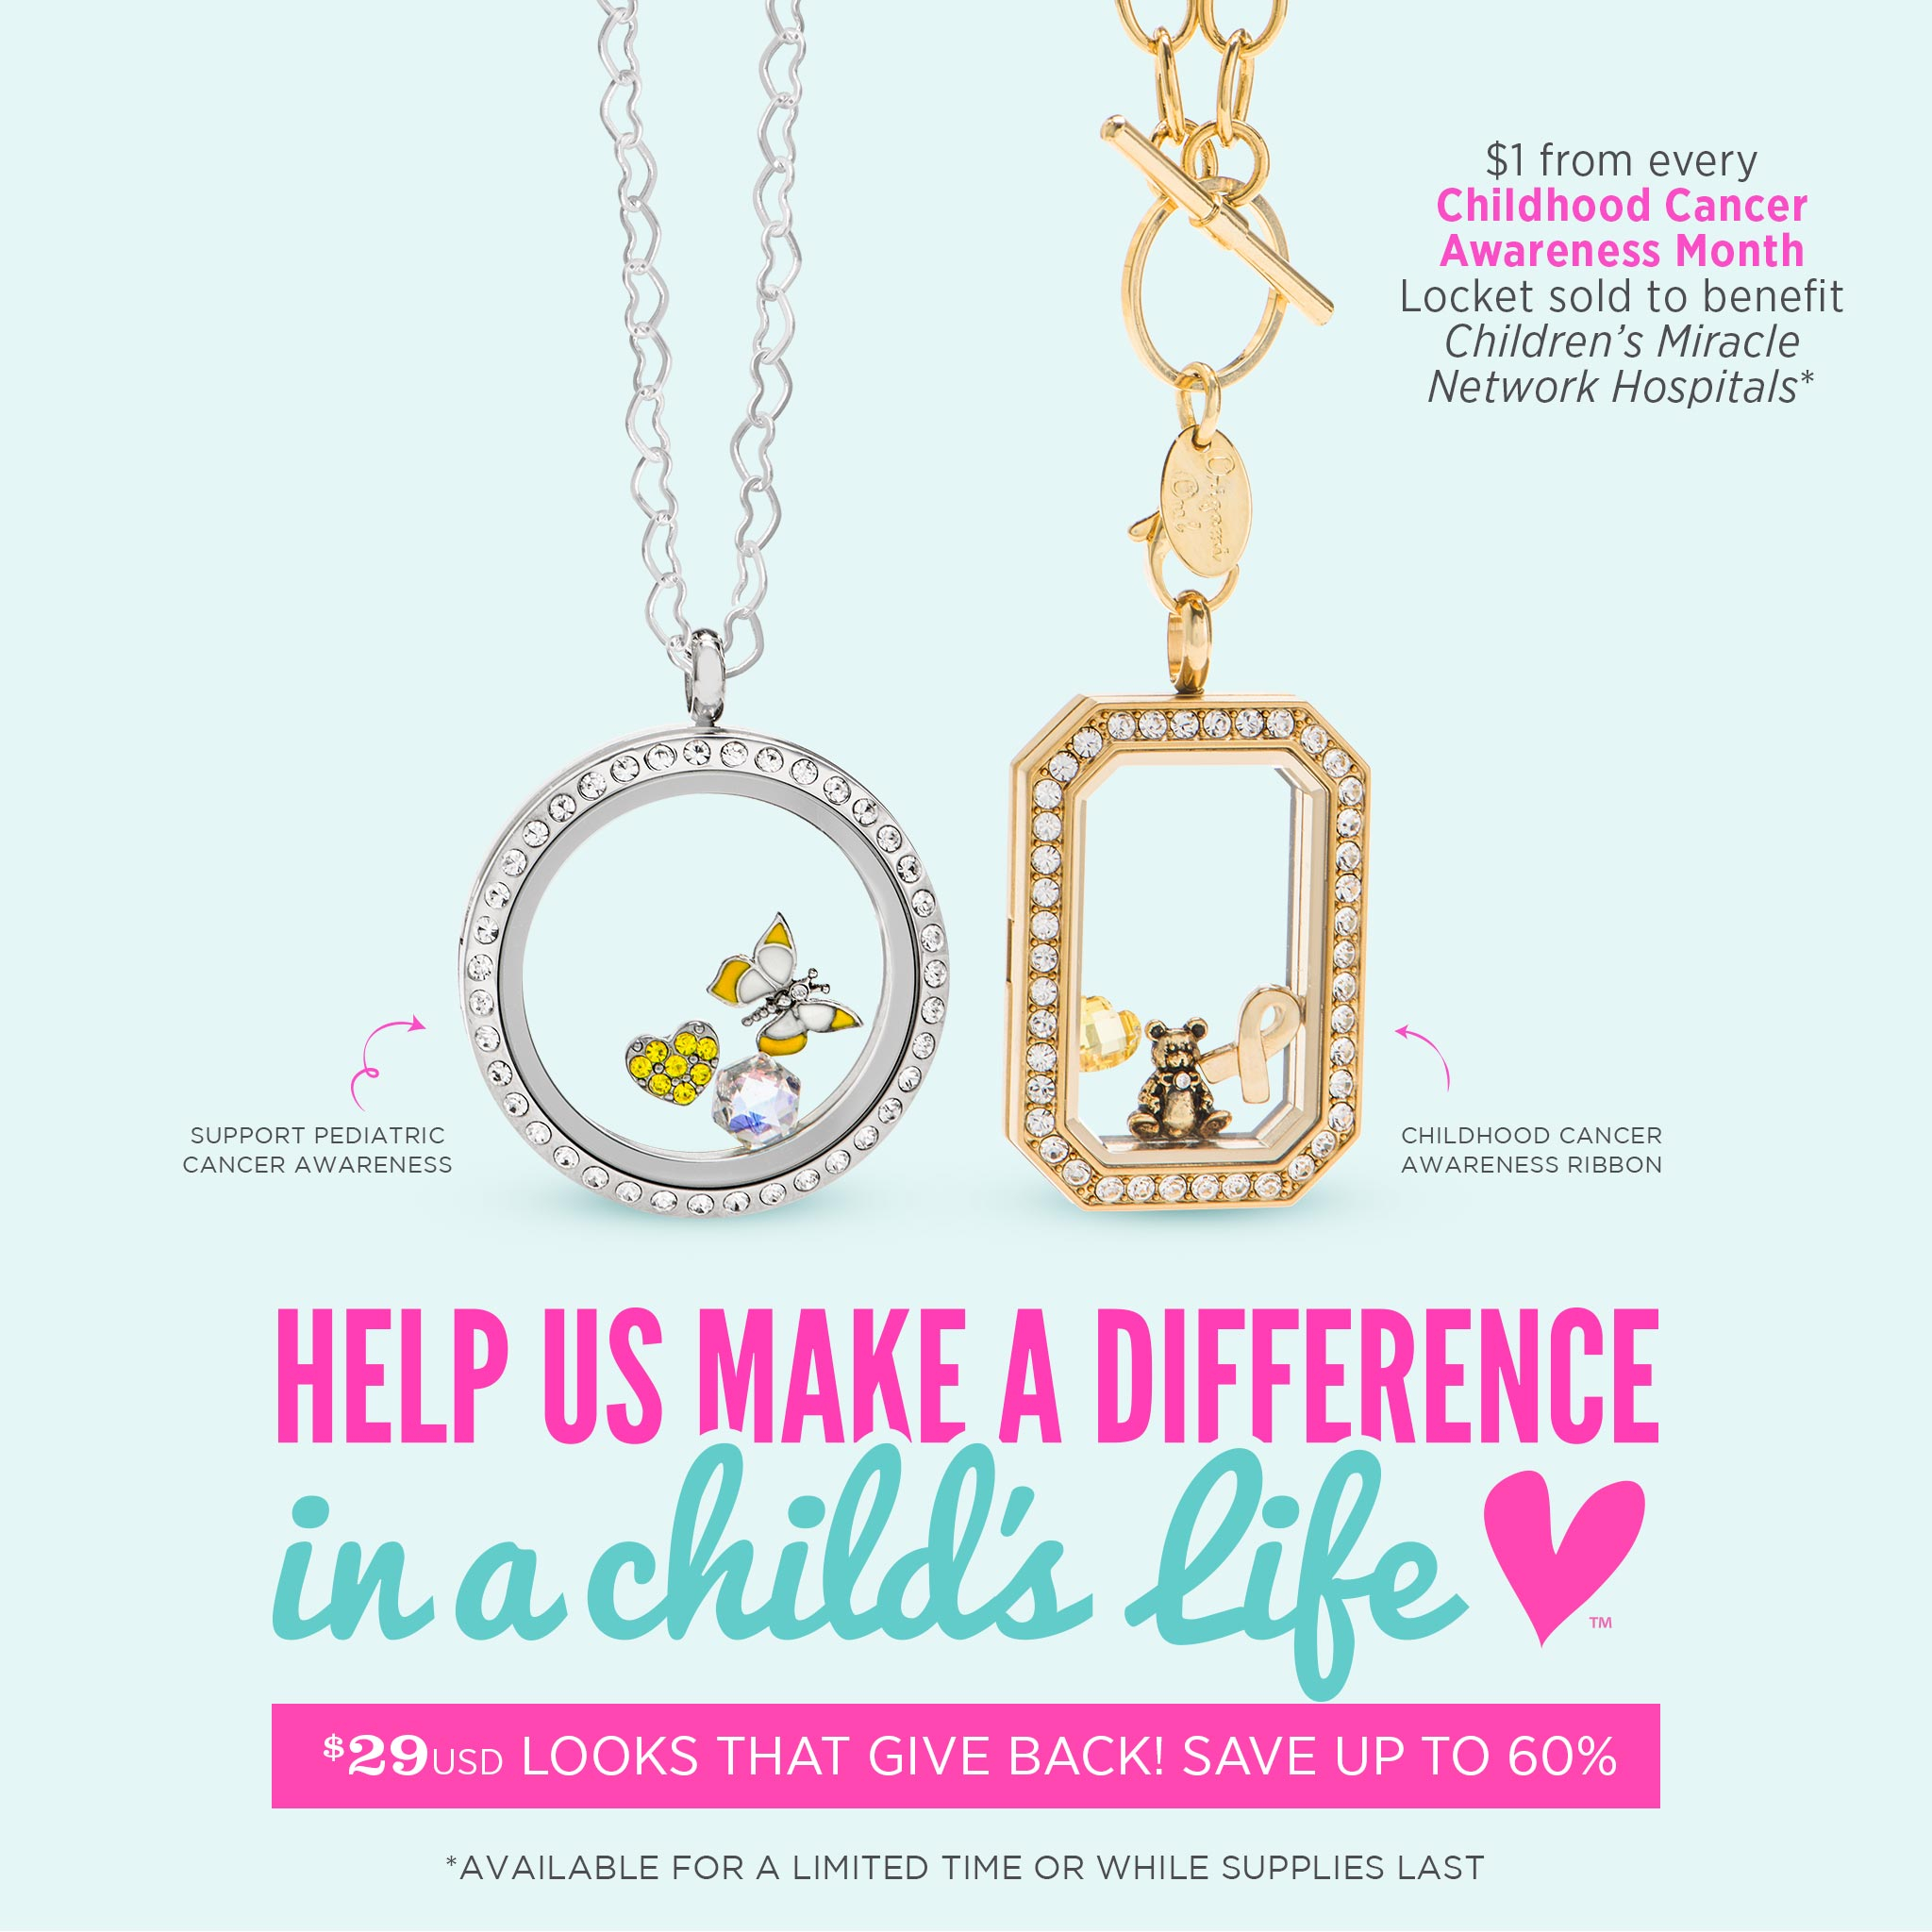 Origami Owl October Specials Locket Loaded With Charm Page 4 Of 6 Lorri Nevil Origami Owl